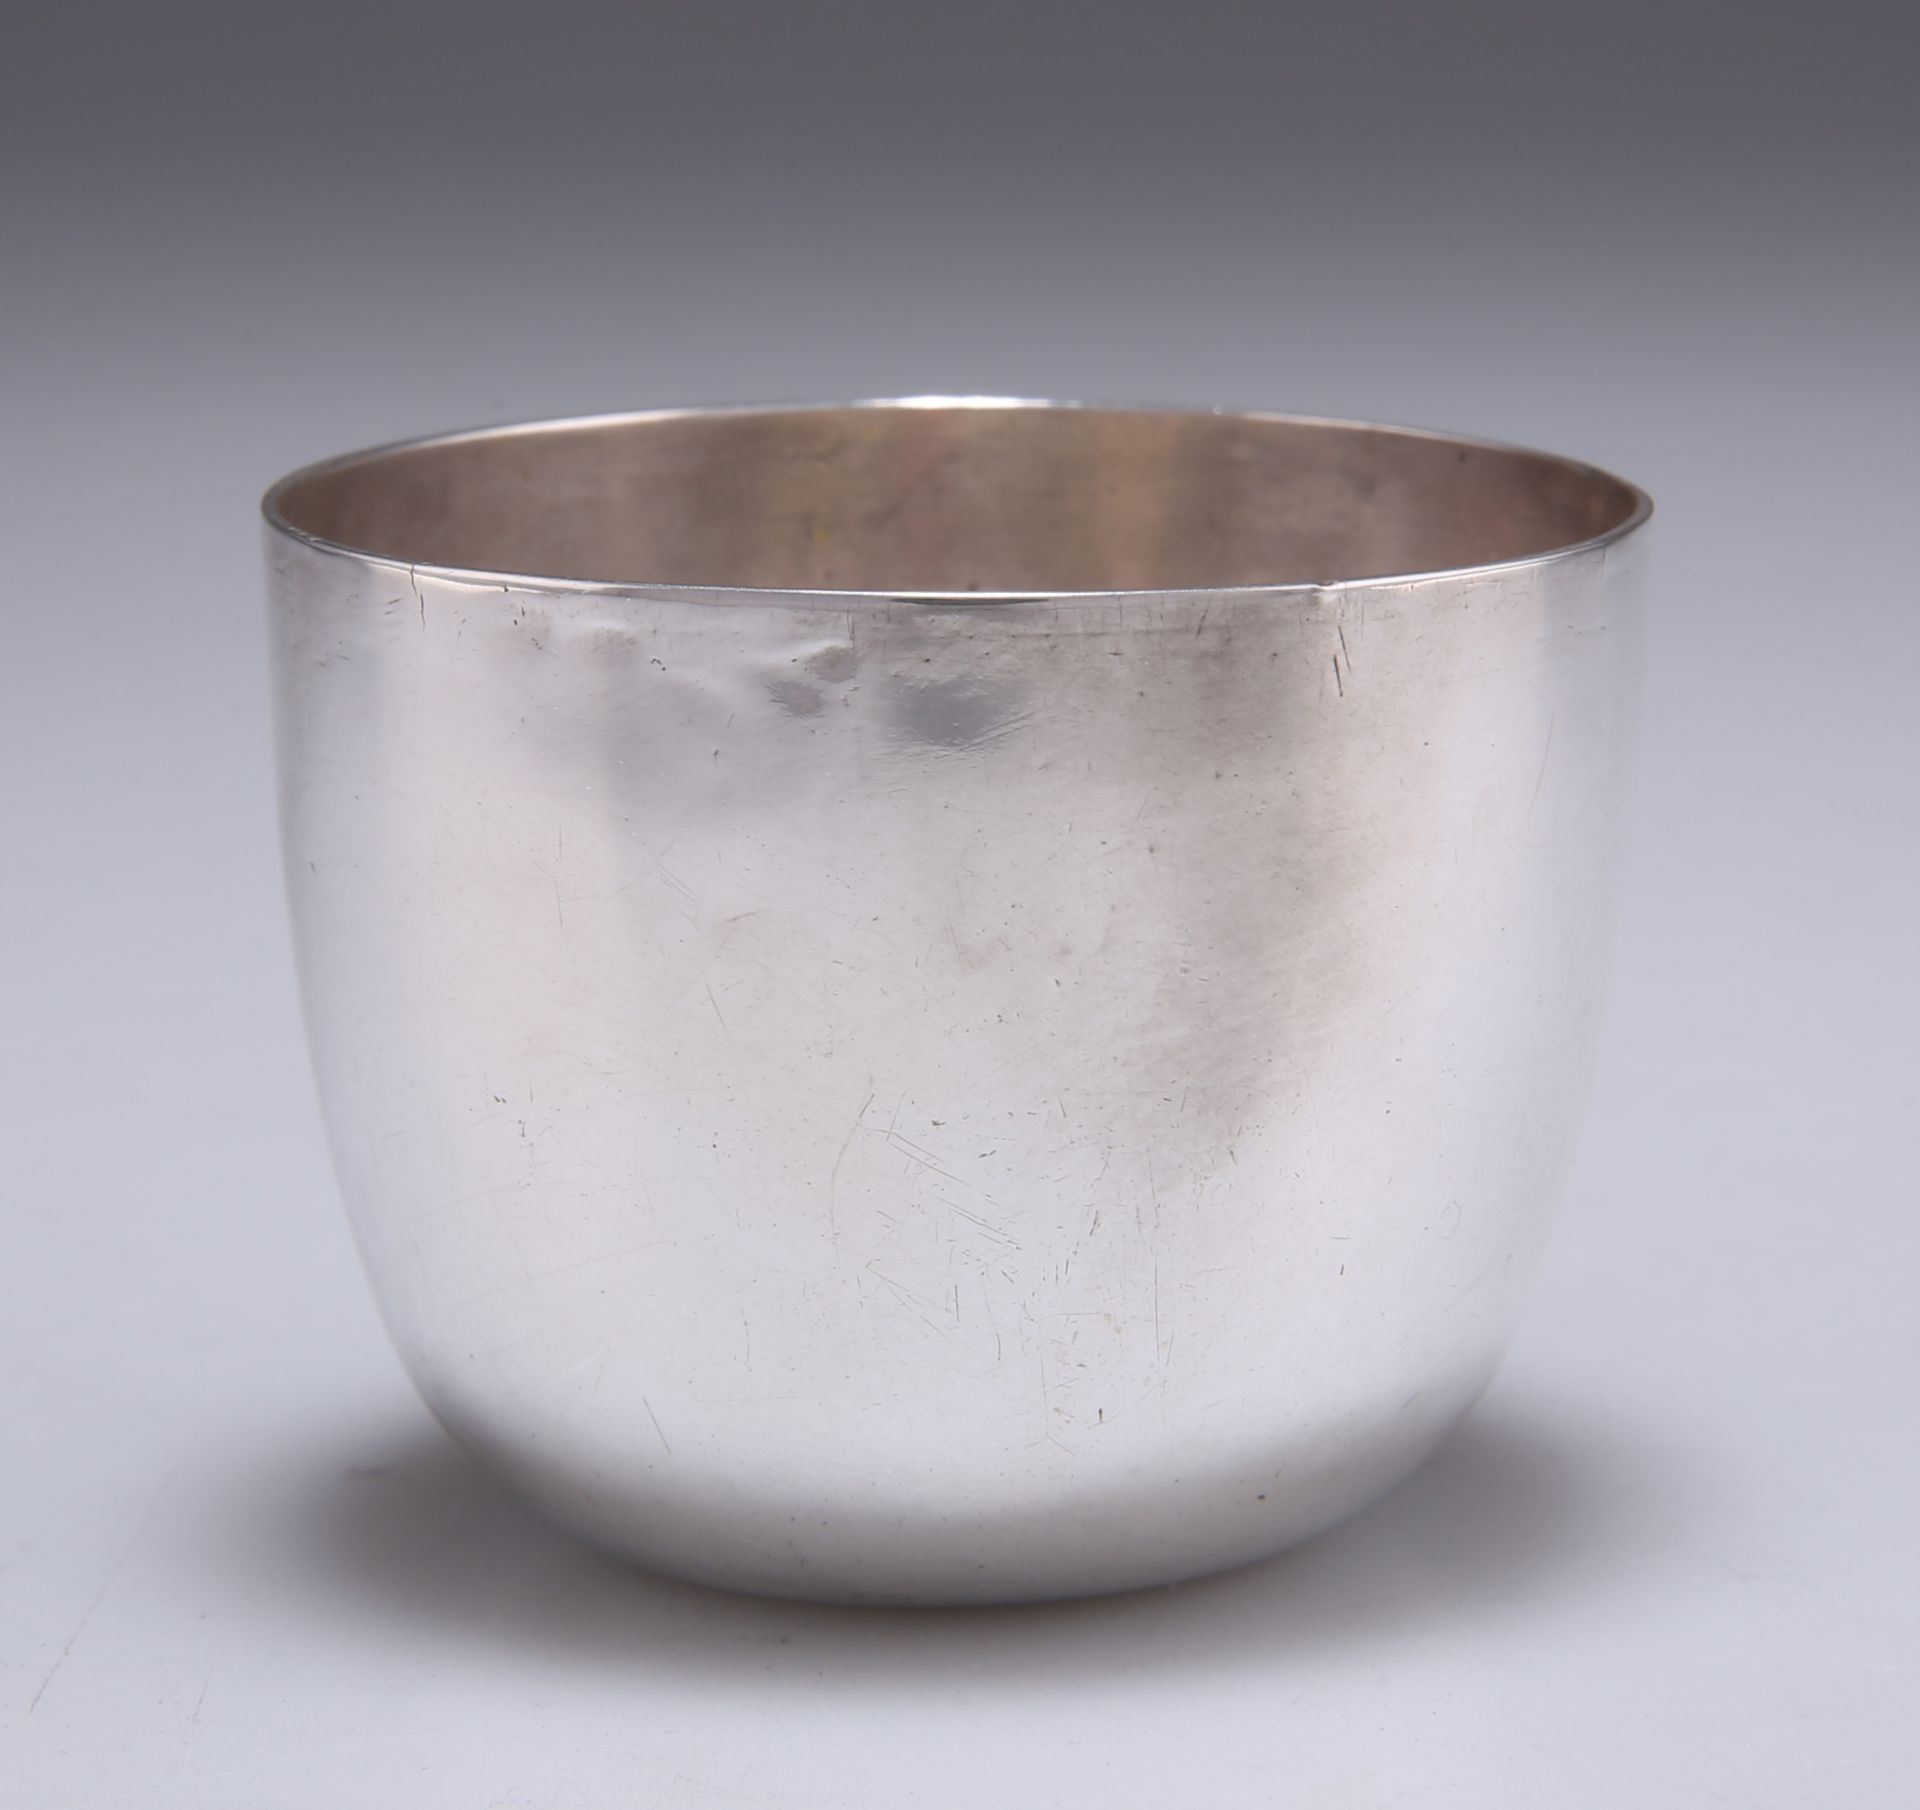 A PROVINCIAL GEORGE III SILVER TUMBLER CUP